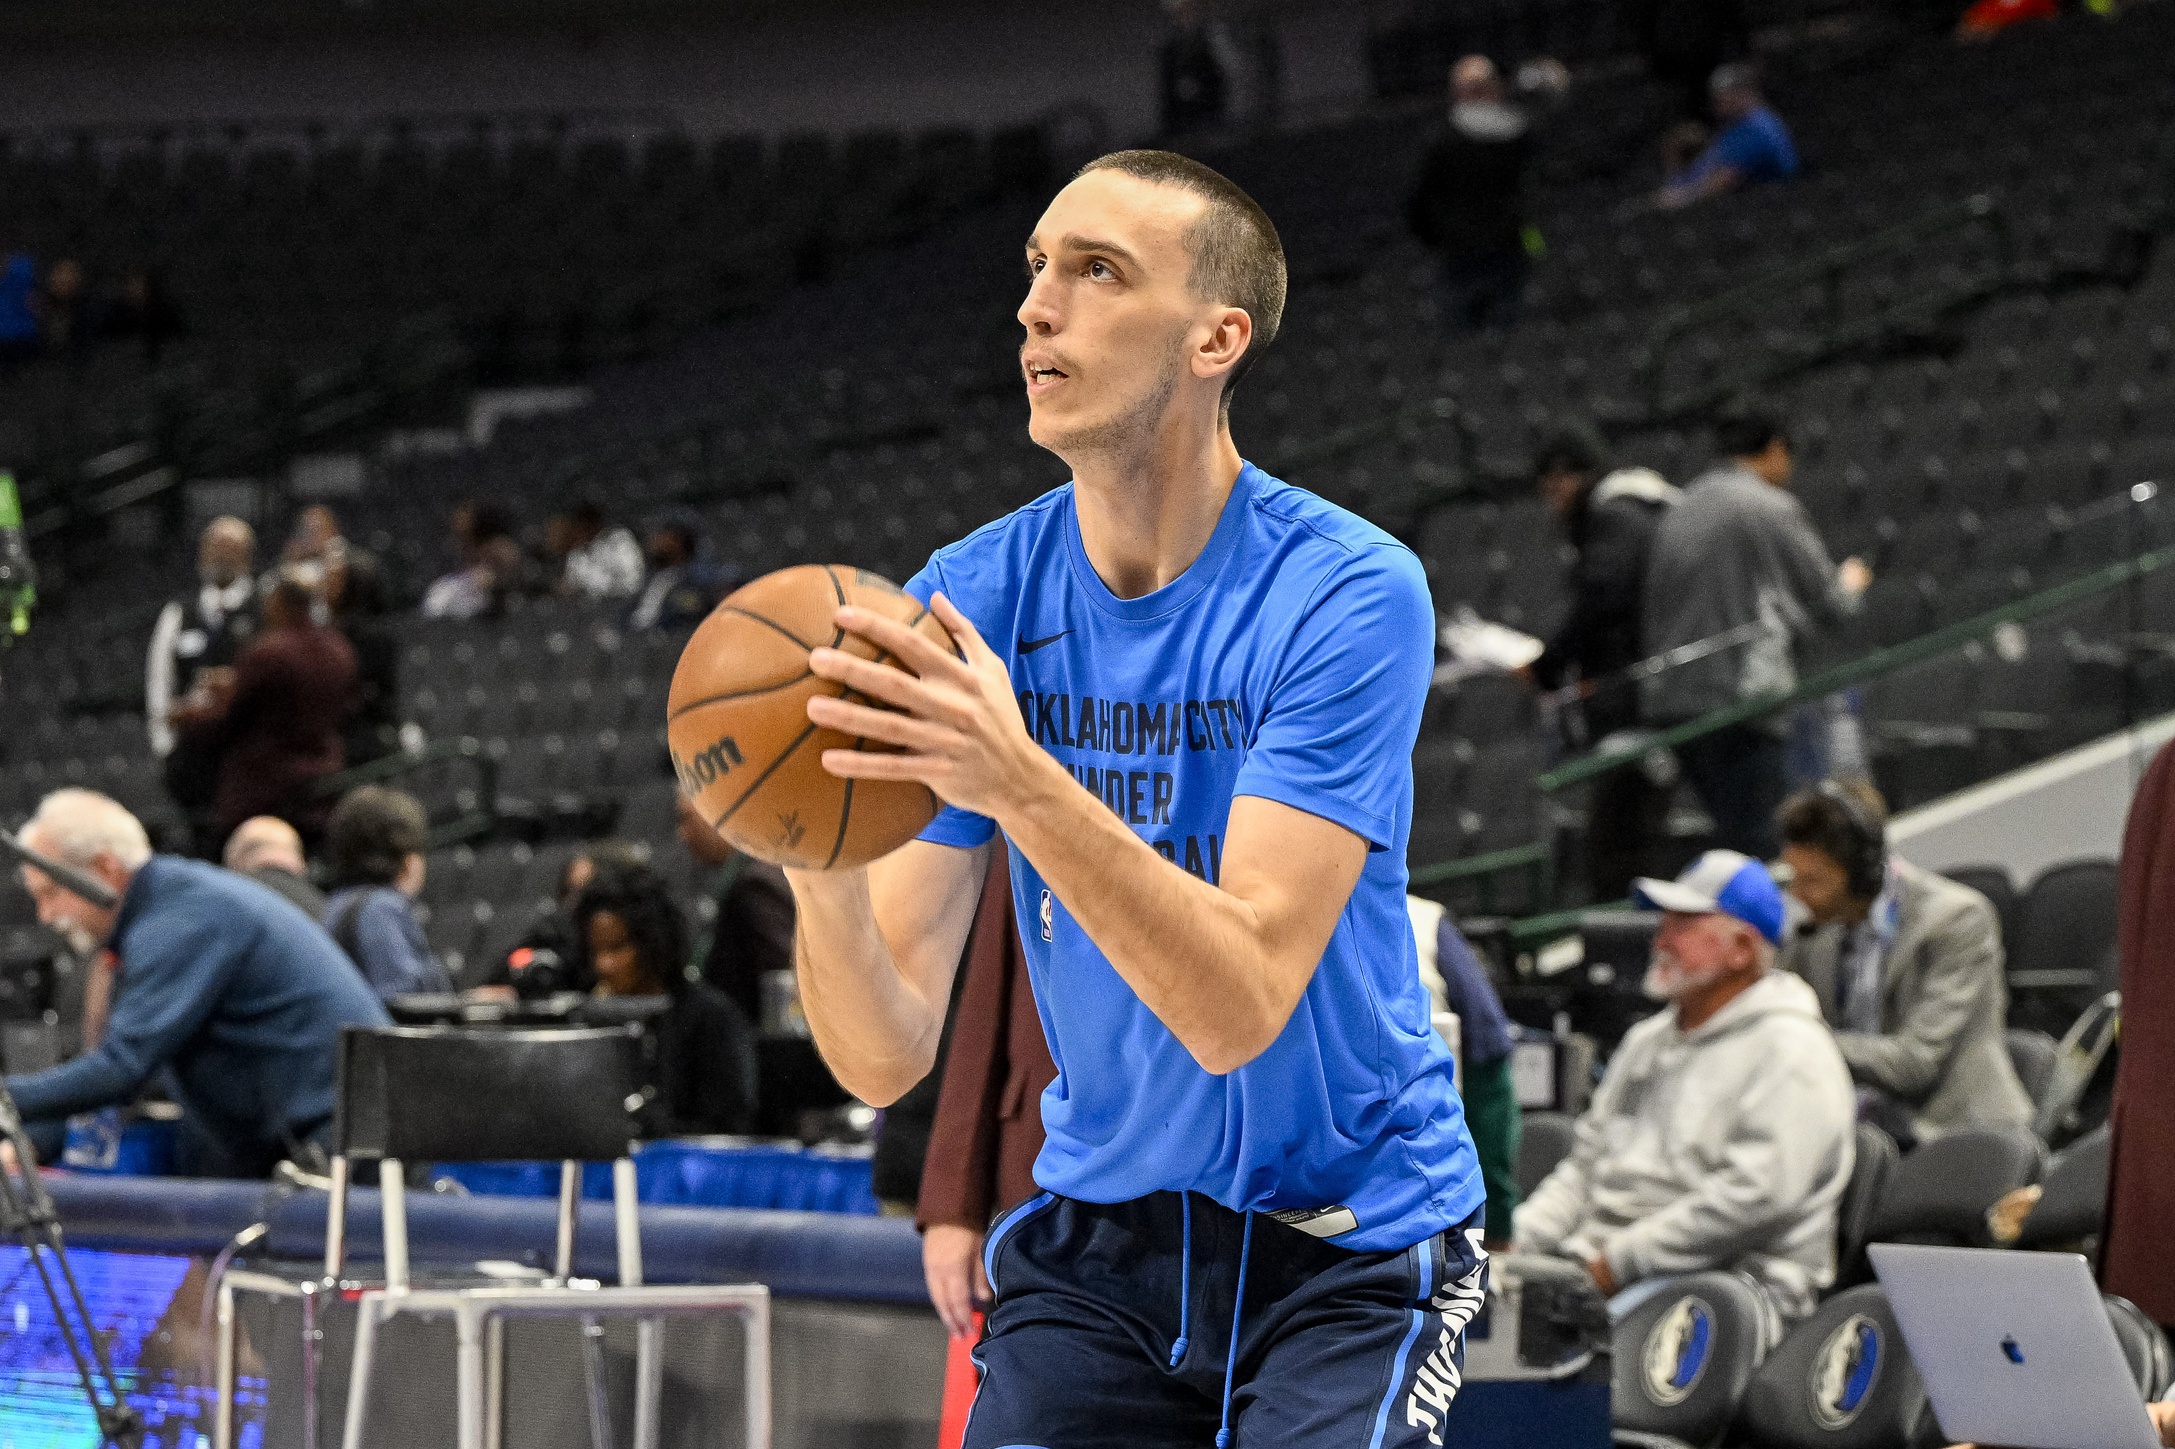 Oklahoma City Thunder forward Aleksej Pokusevski (17) warms up before the game between the Dallas Mavericks and the Oklahoma City Thunder at the American Airlines Center.